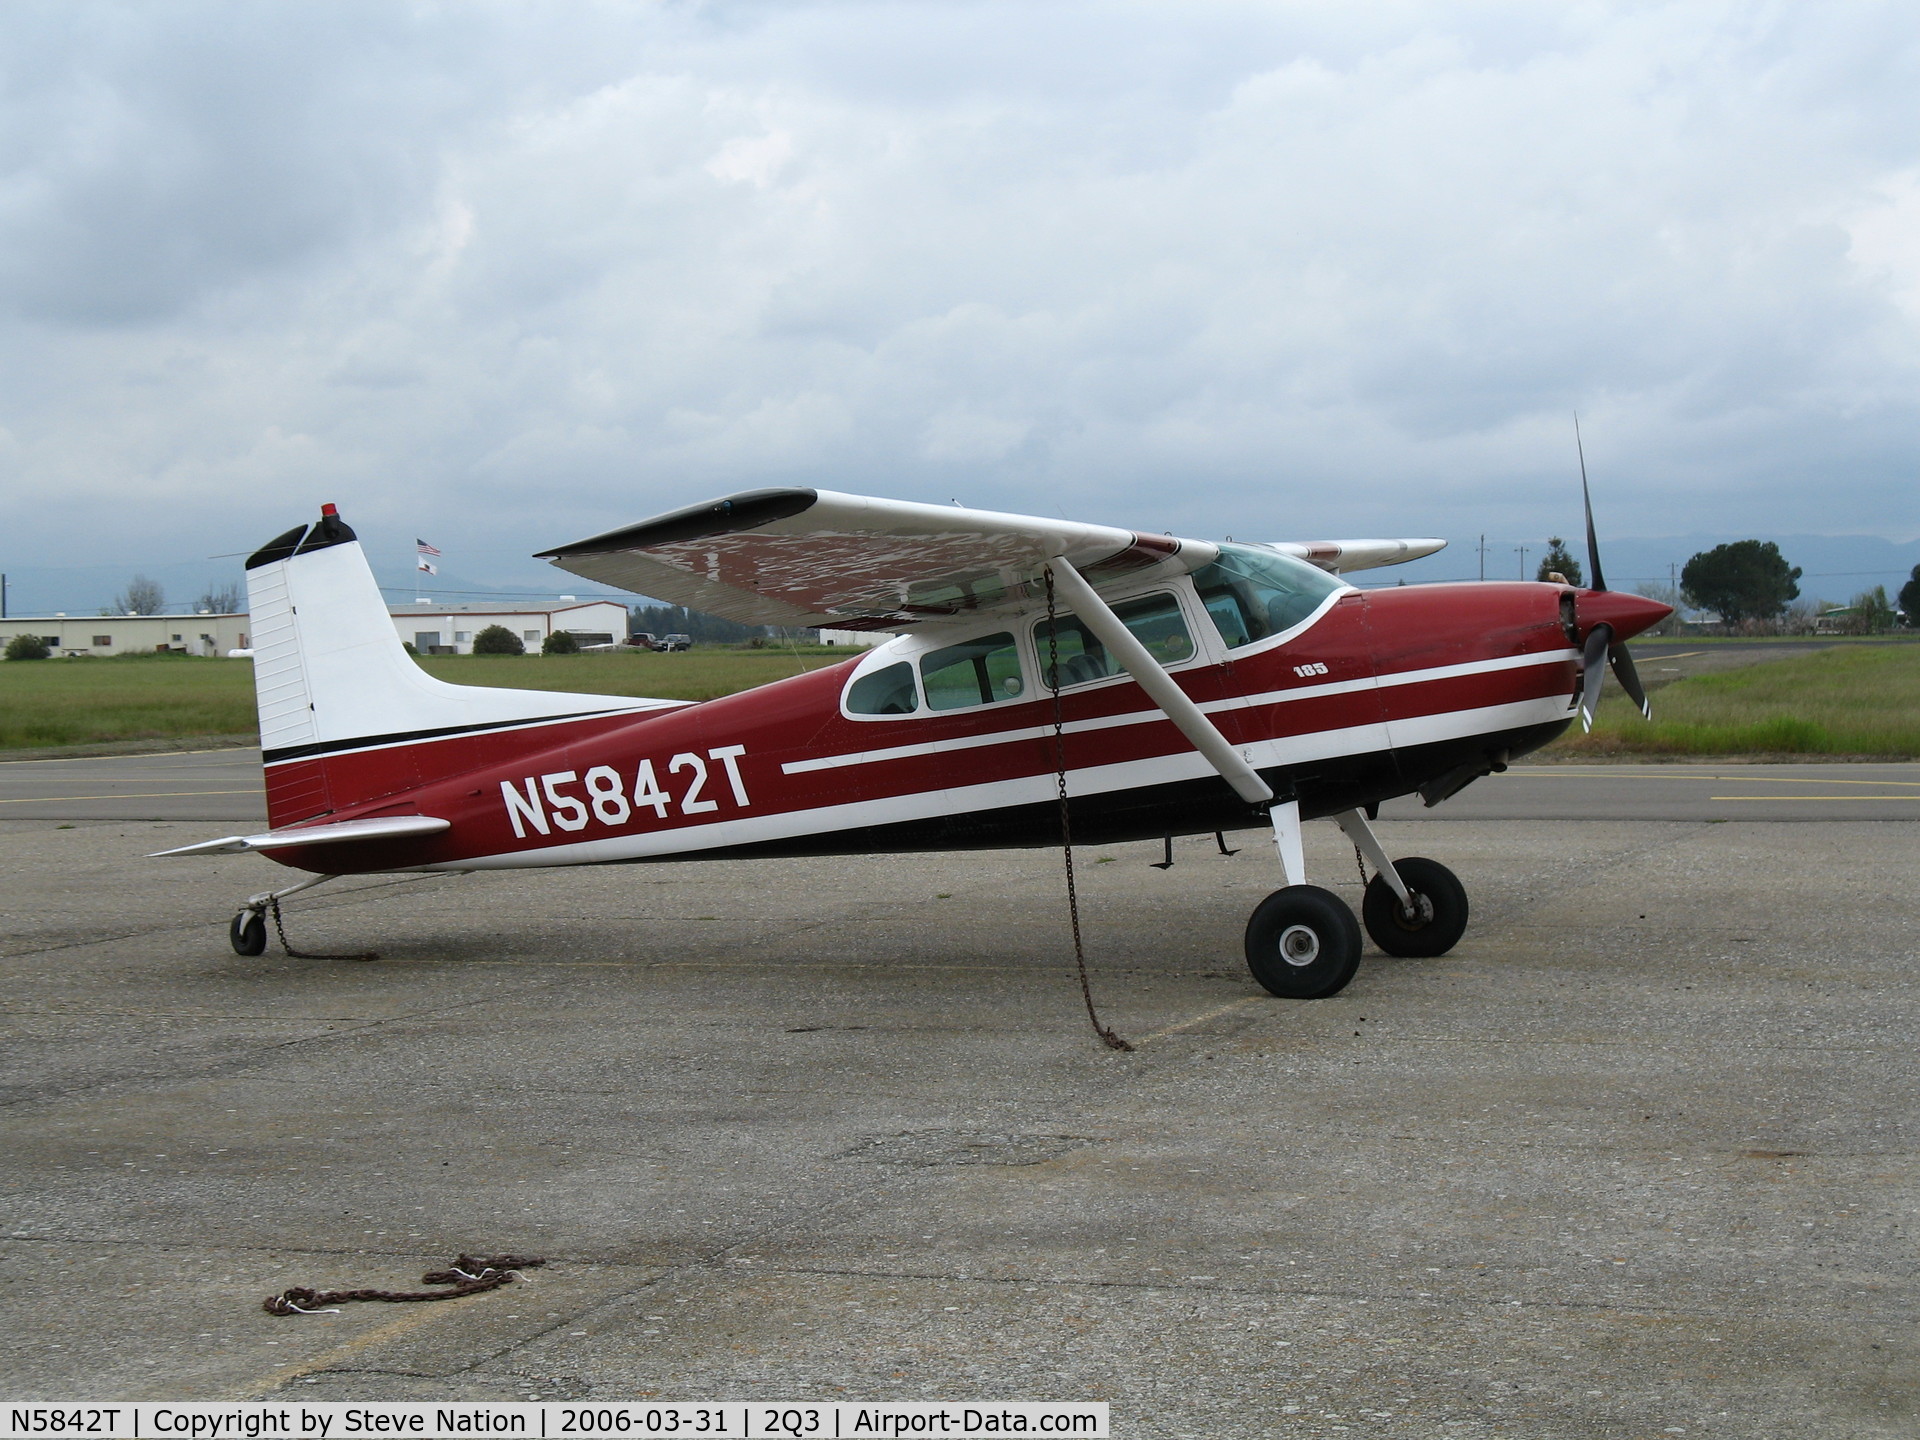 N5842T, 1964 Cessna 185C Skywagon C/N 185-0742, Over to Yolo County Airport, Woodland, CA from nearby Walnut Grove